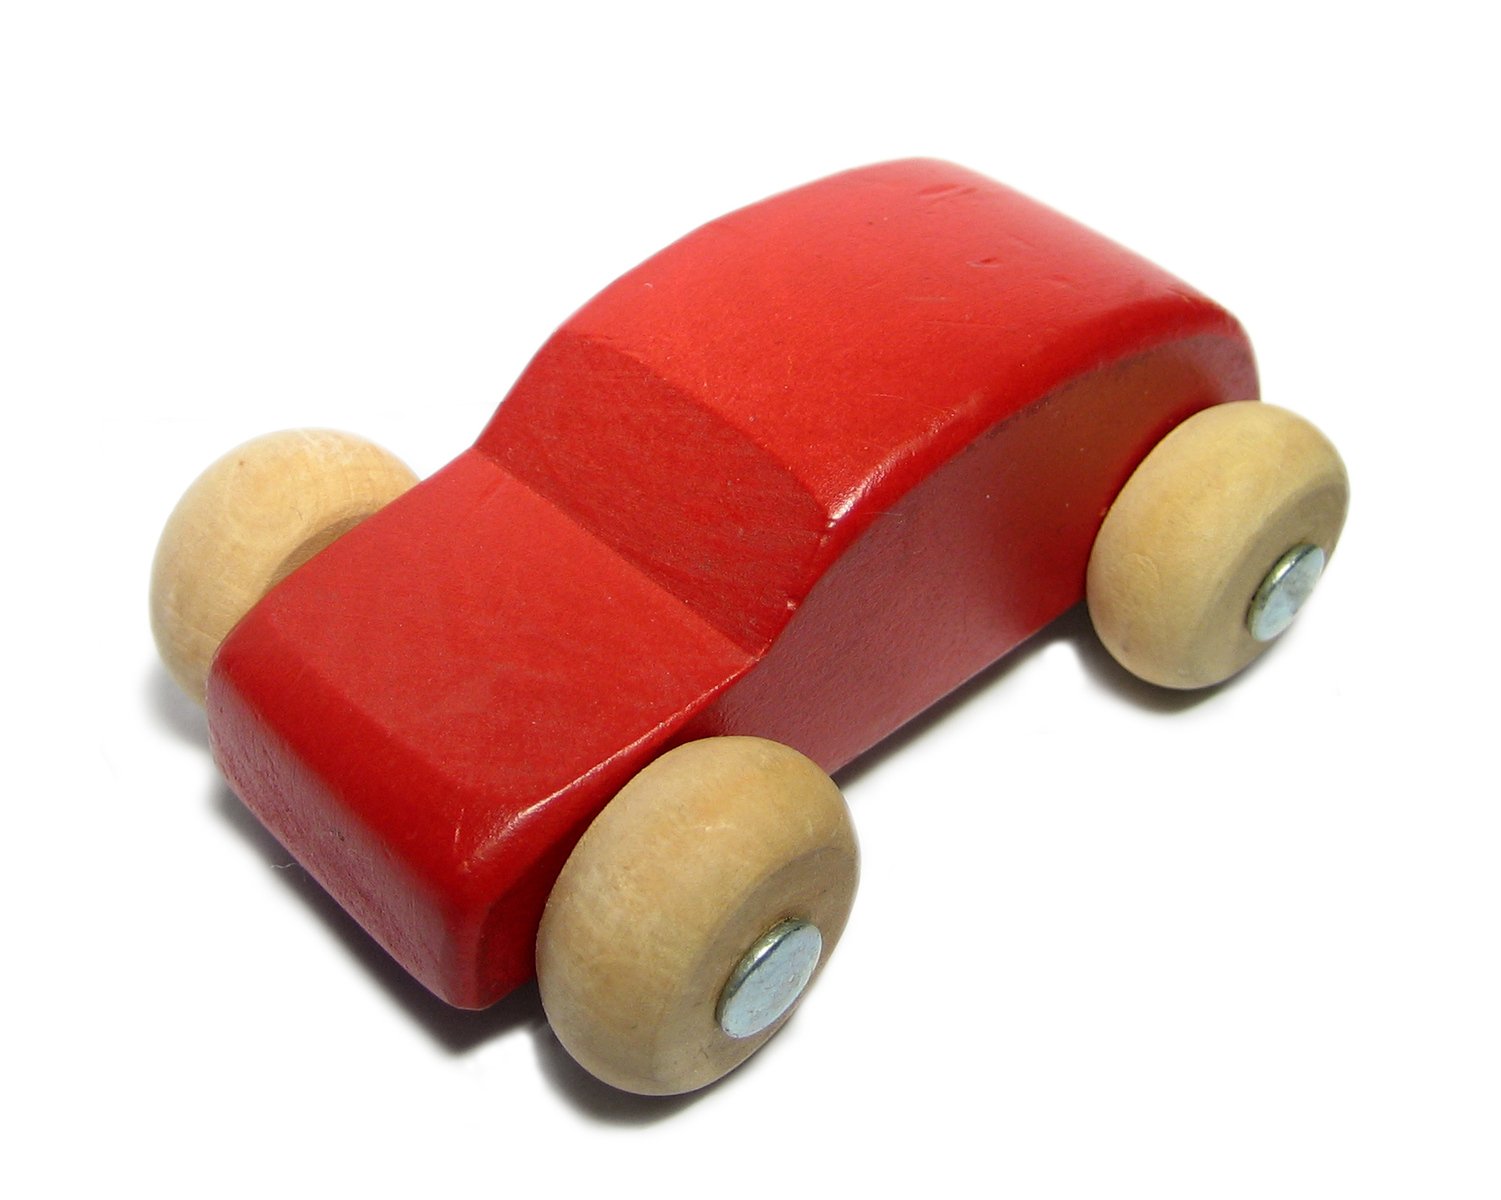 a red wooden toy car sitting on a white surface